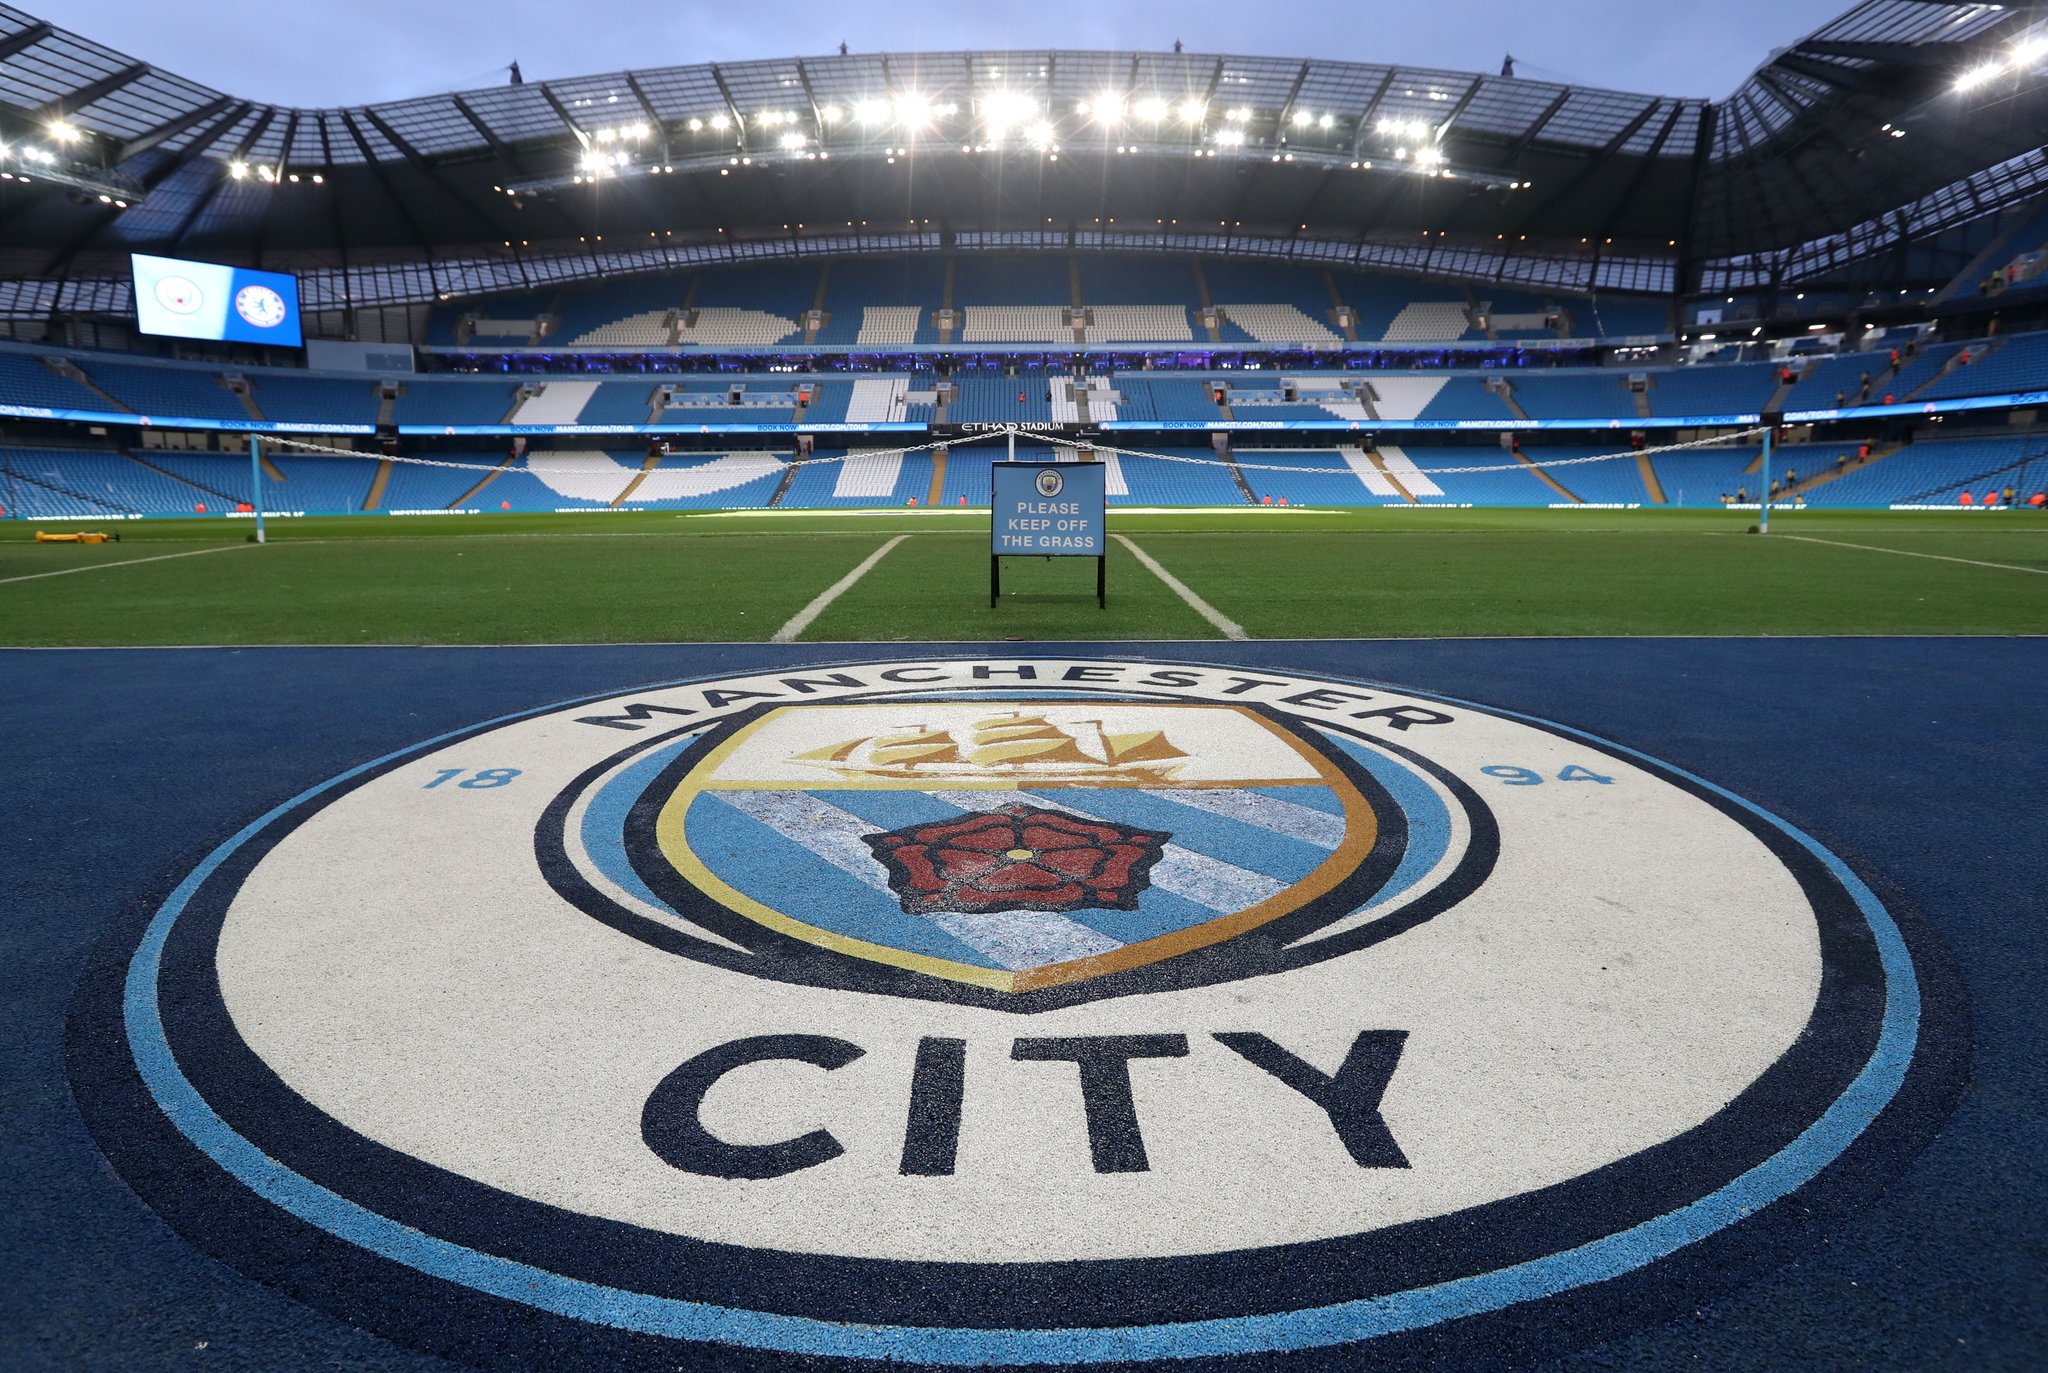 https://nftgames.net/wp-content/uploads/2022/05/Manchester-City-To-Launch-NFT-Collectibles-To-Drive-More-Fan-Engagement.jpg